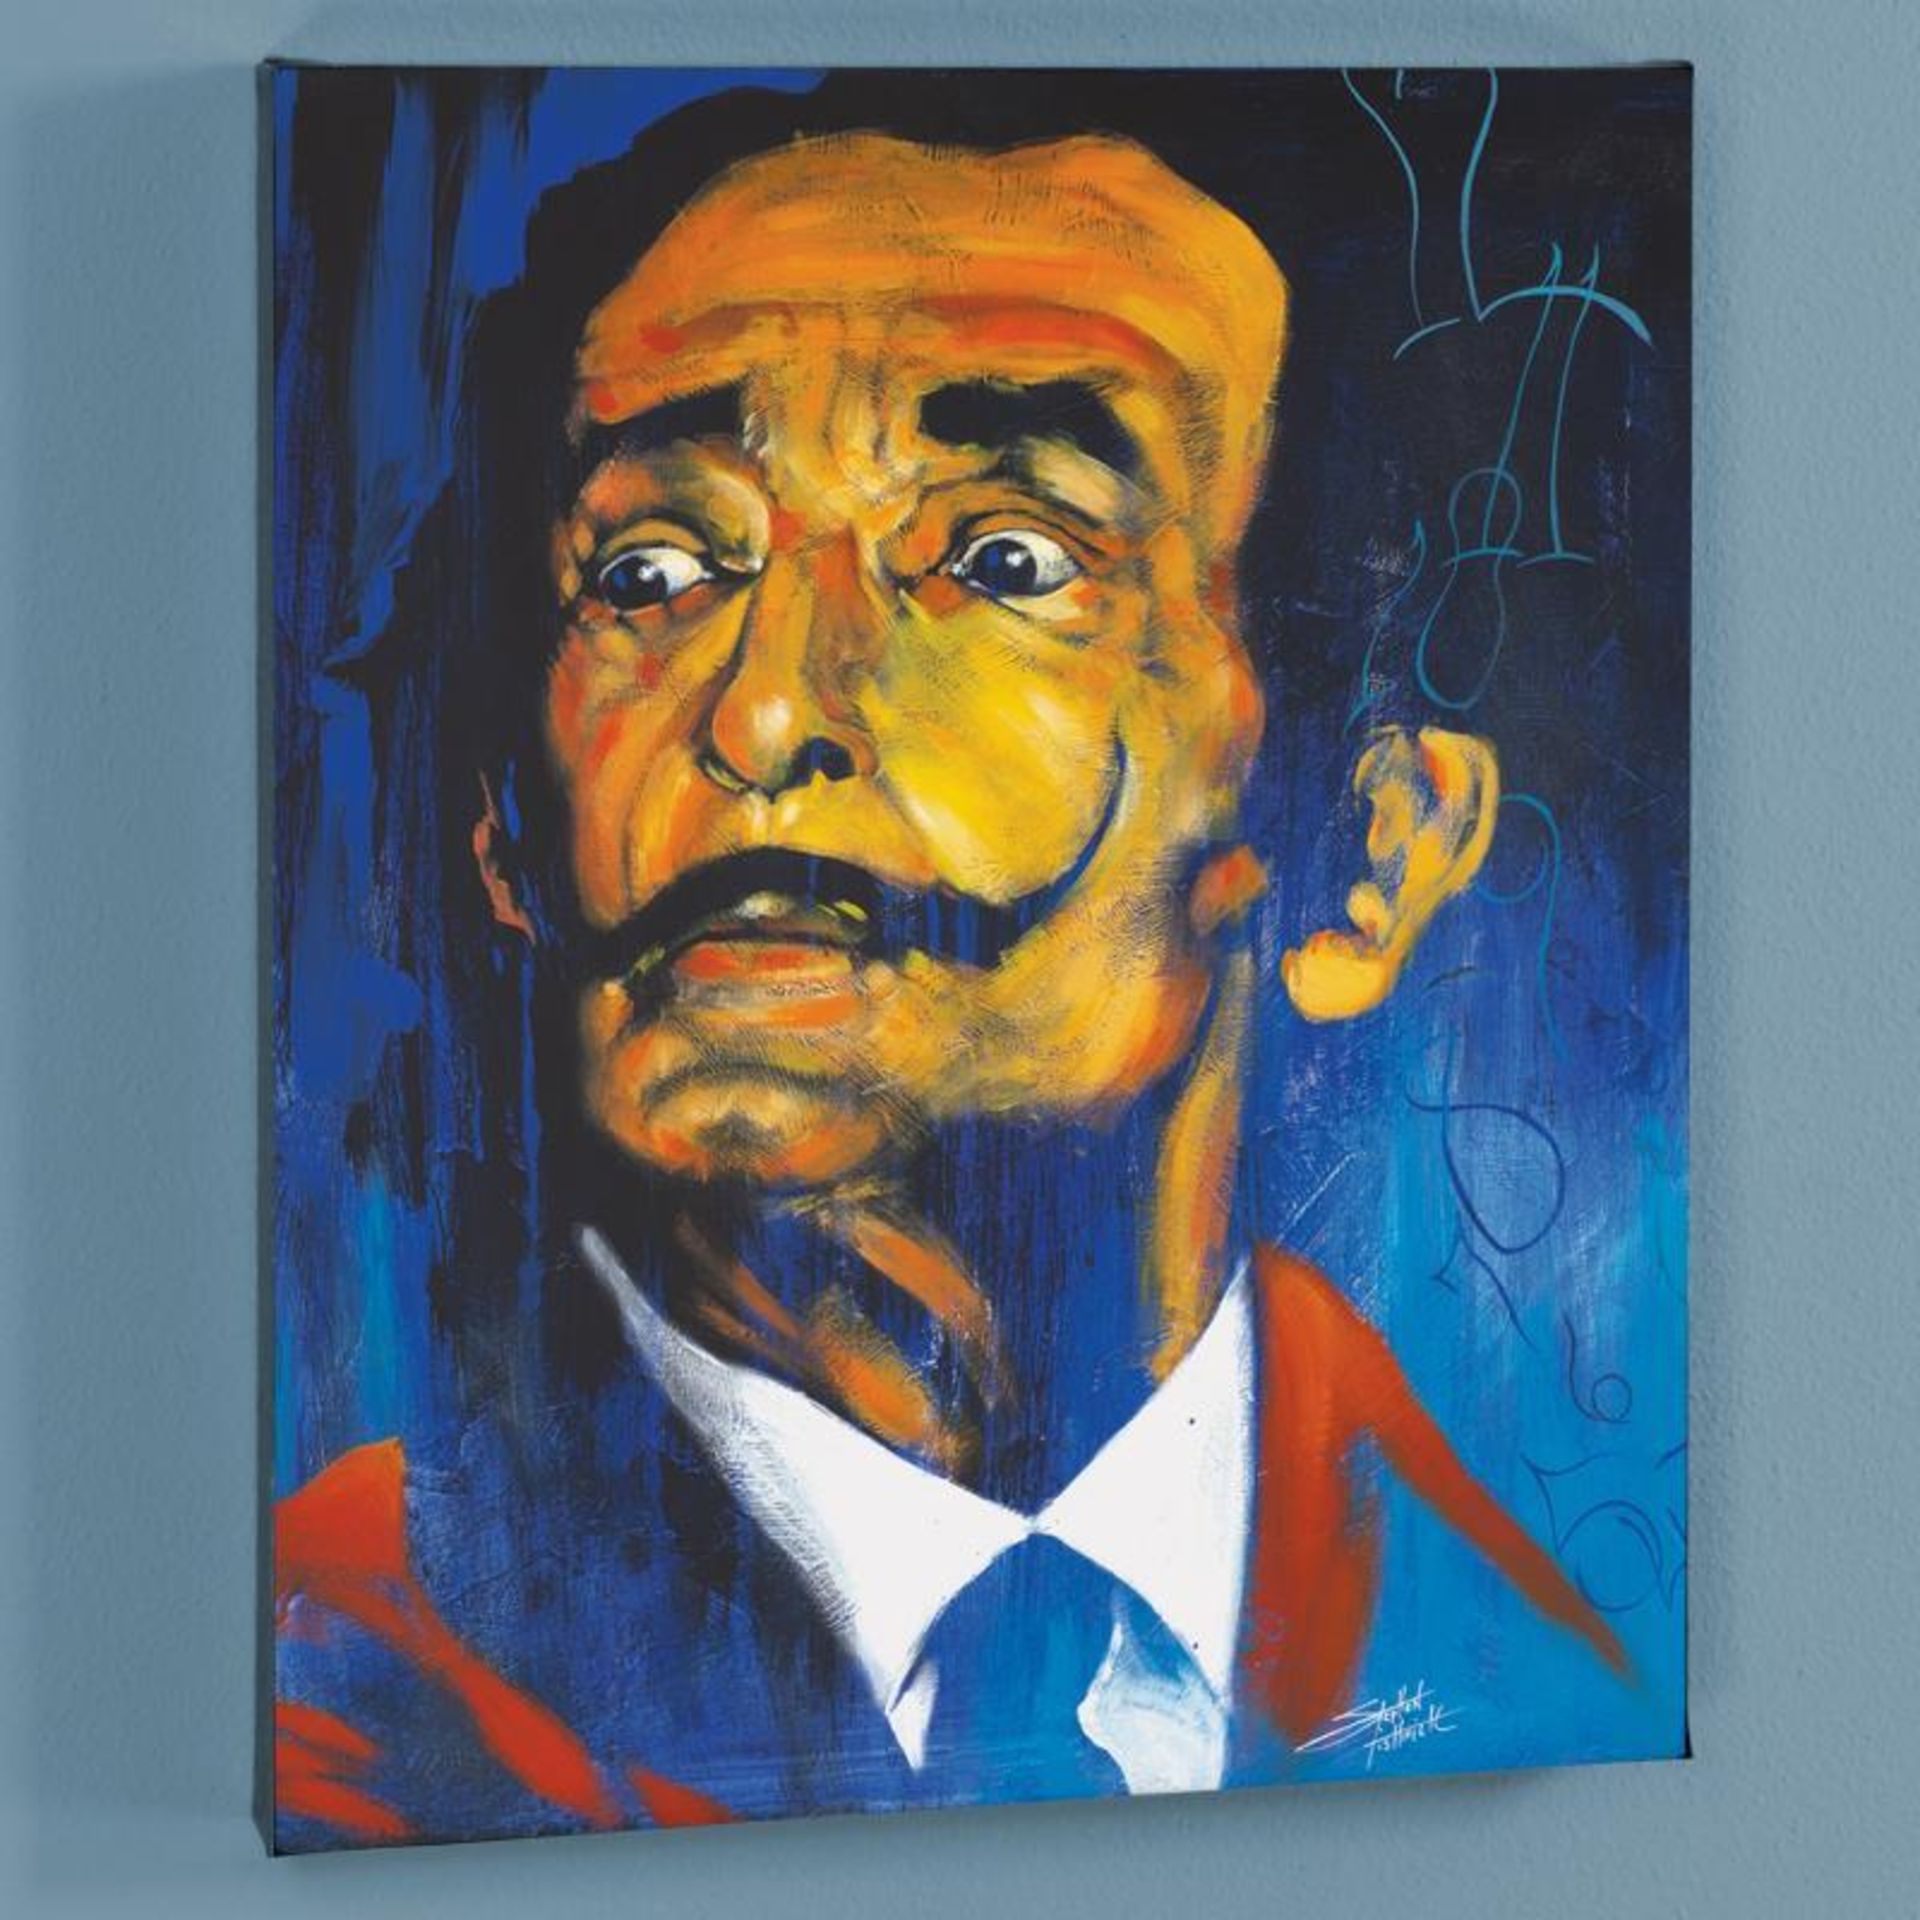 "Dali" Limited Edition Giclee on Canvas by Stephen Fishwick, Numbered and Signed - Image 3 of 3